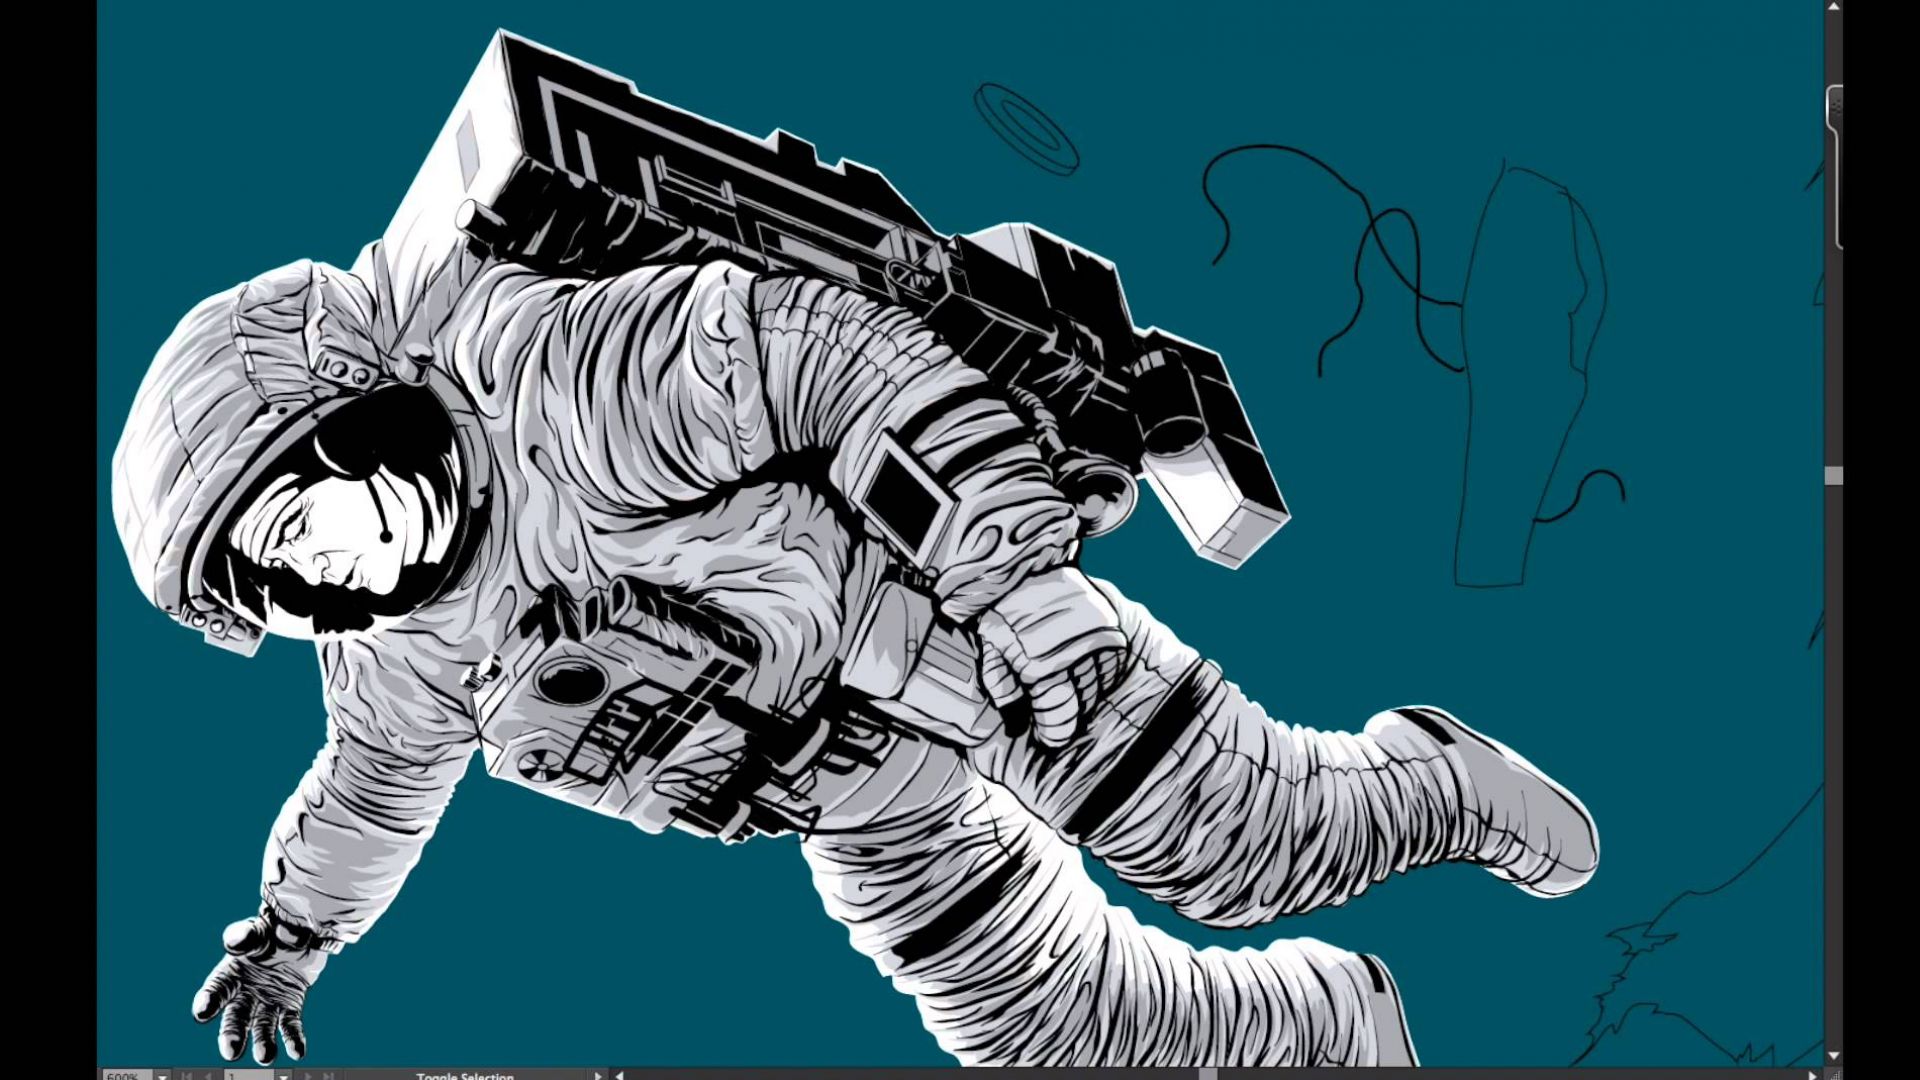 Creating the Gravity poster